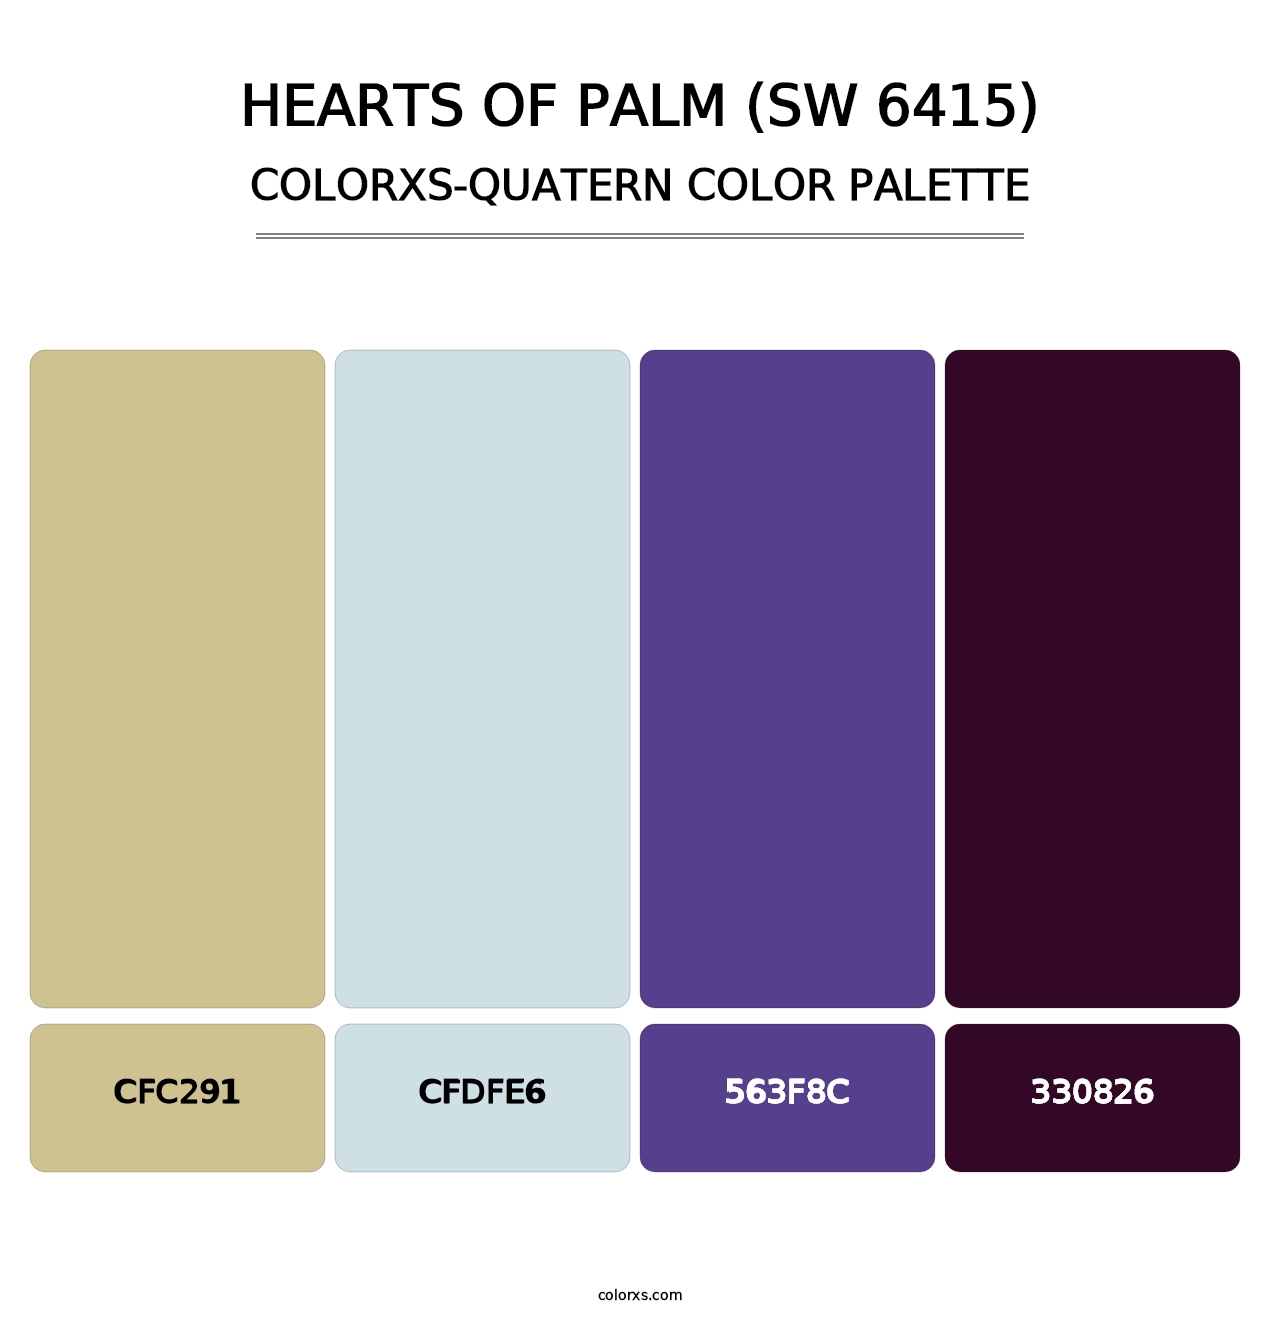 Hearts of Palm (SW 6415) - Colorxs Quatern Palette